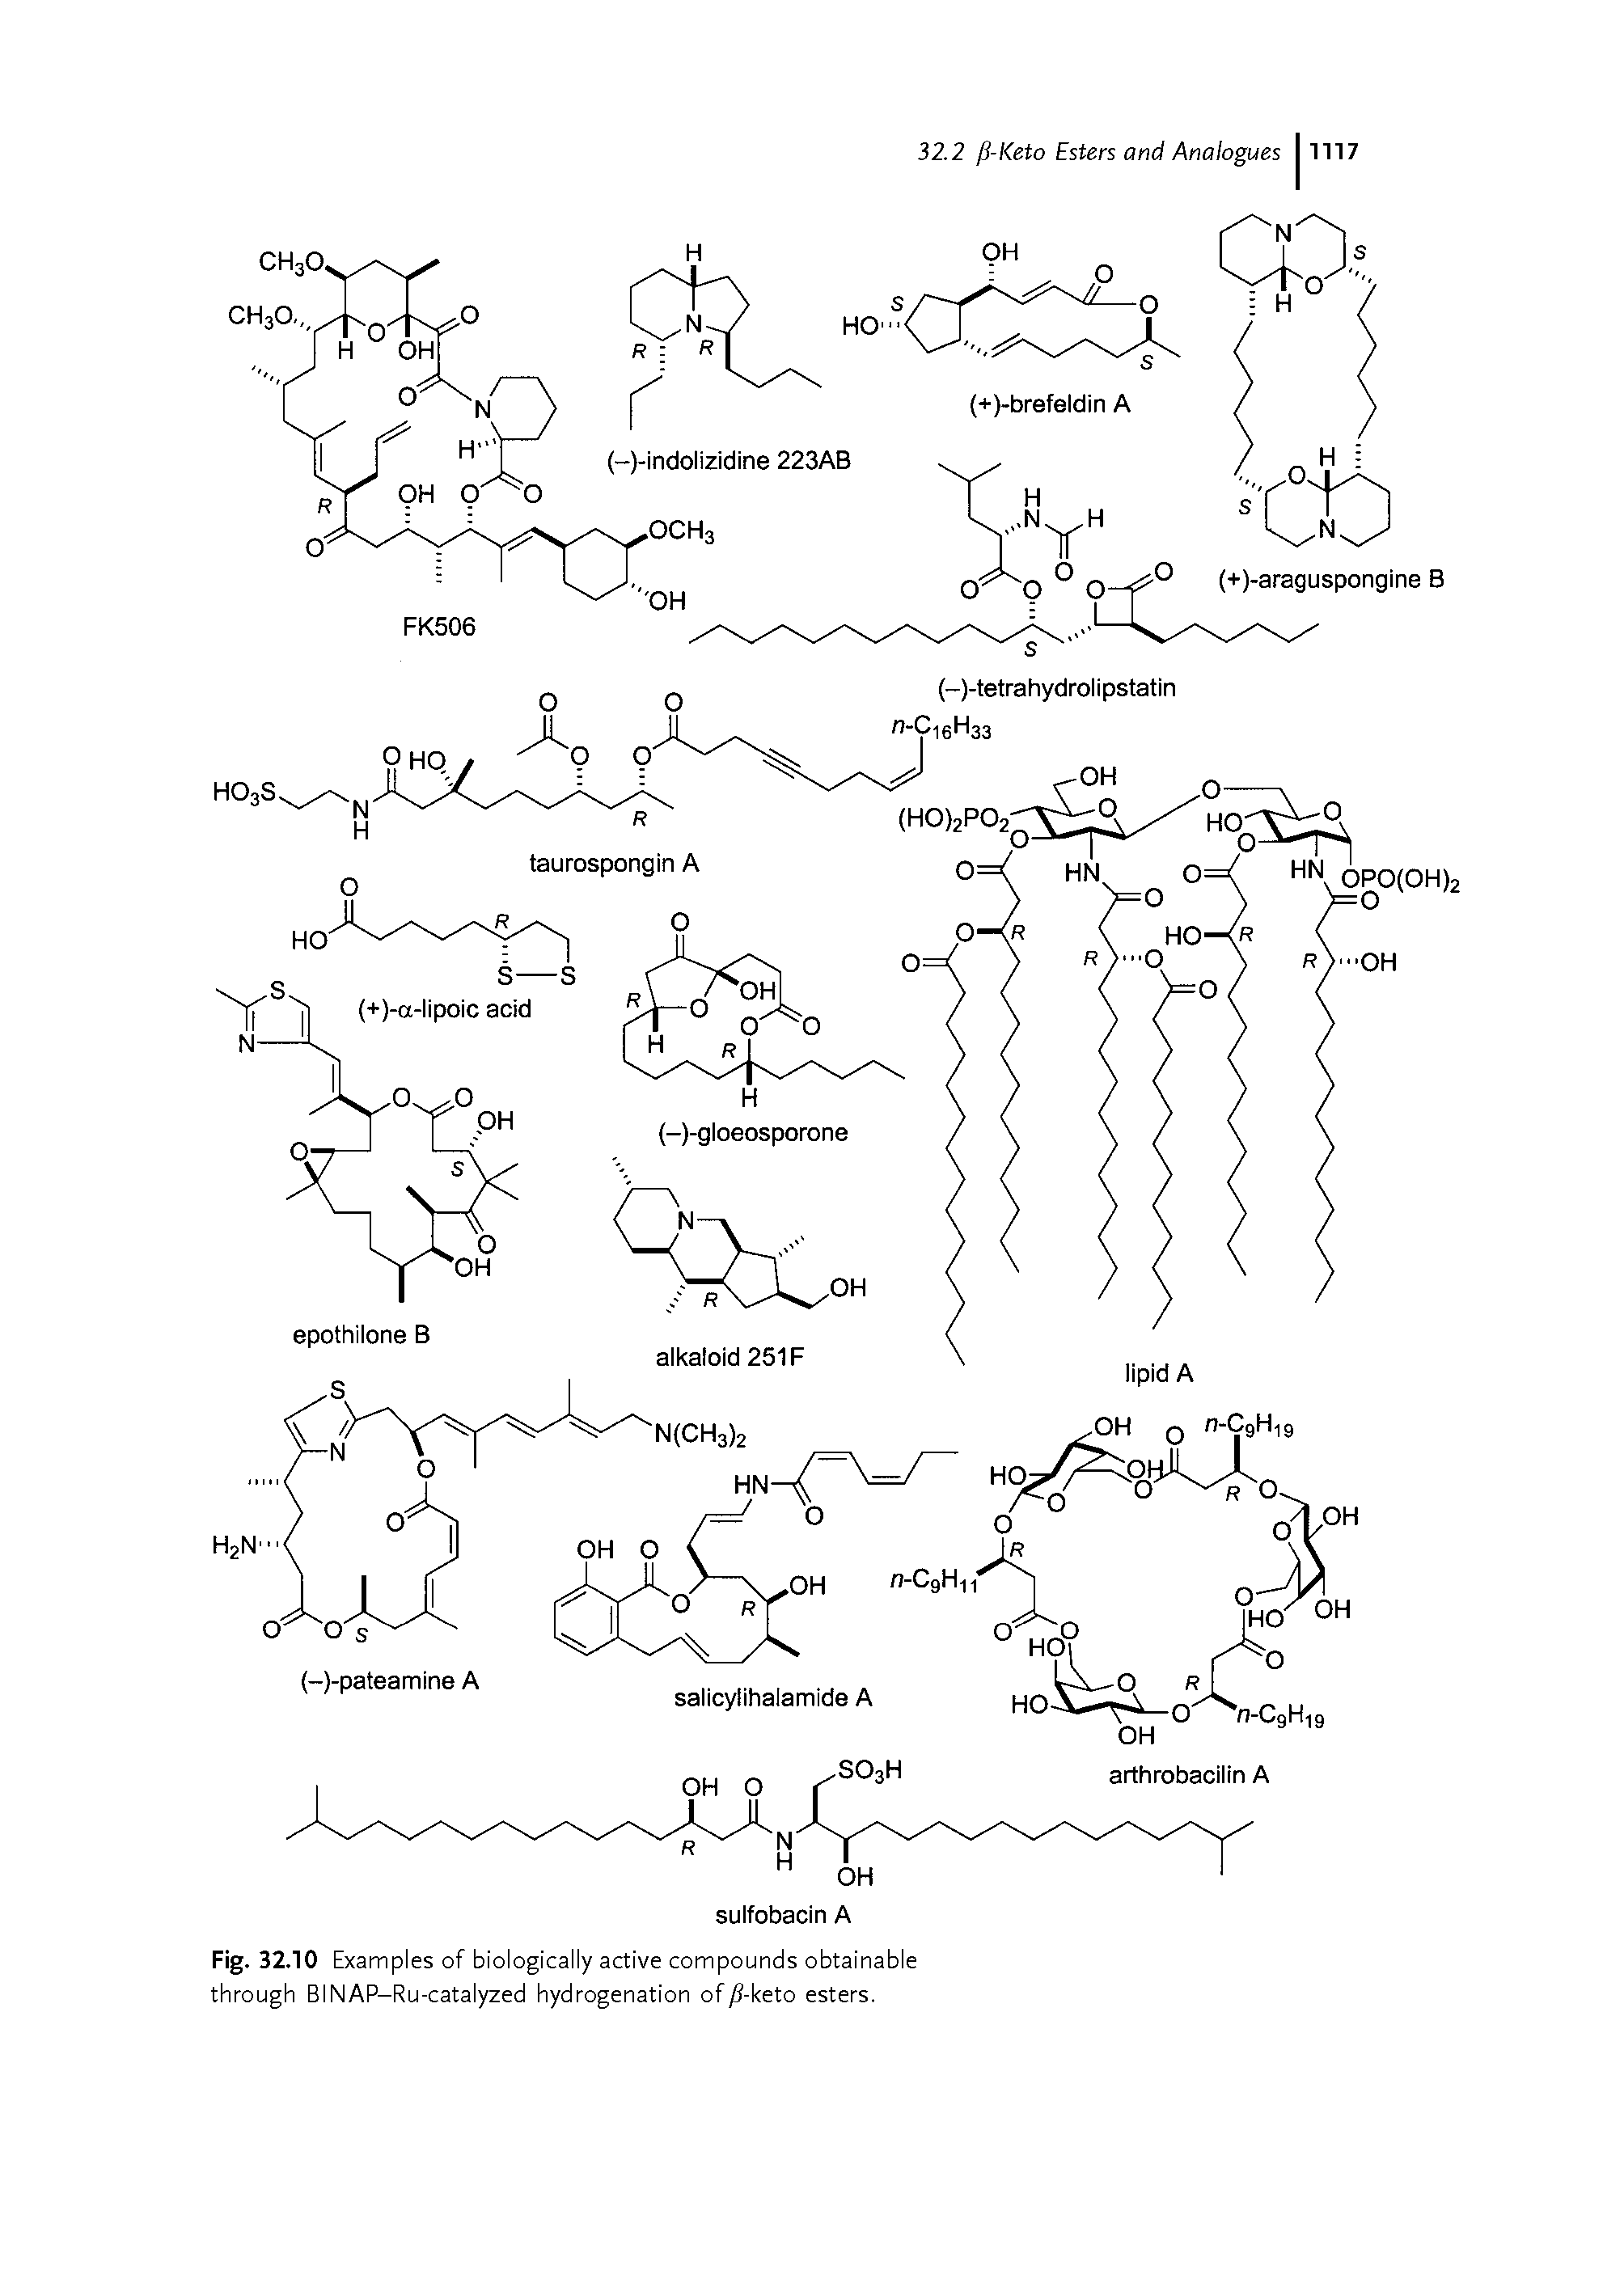 Fig. 32.10 Examples of biologically active compounds obtainable through BINAP-Ru-catalyzed hydrogenation of/ -keto esters.